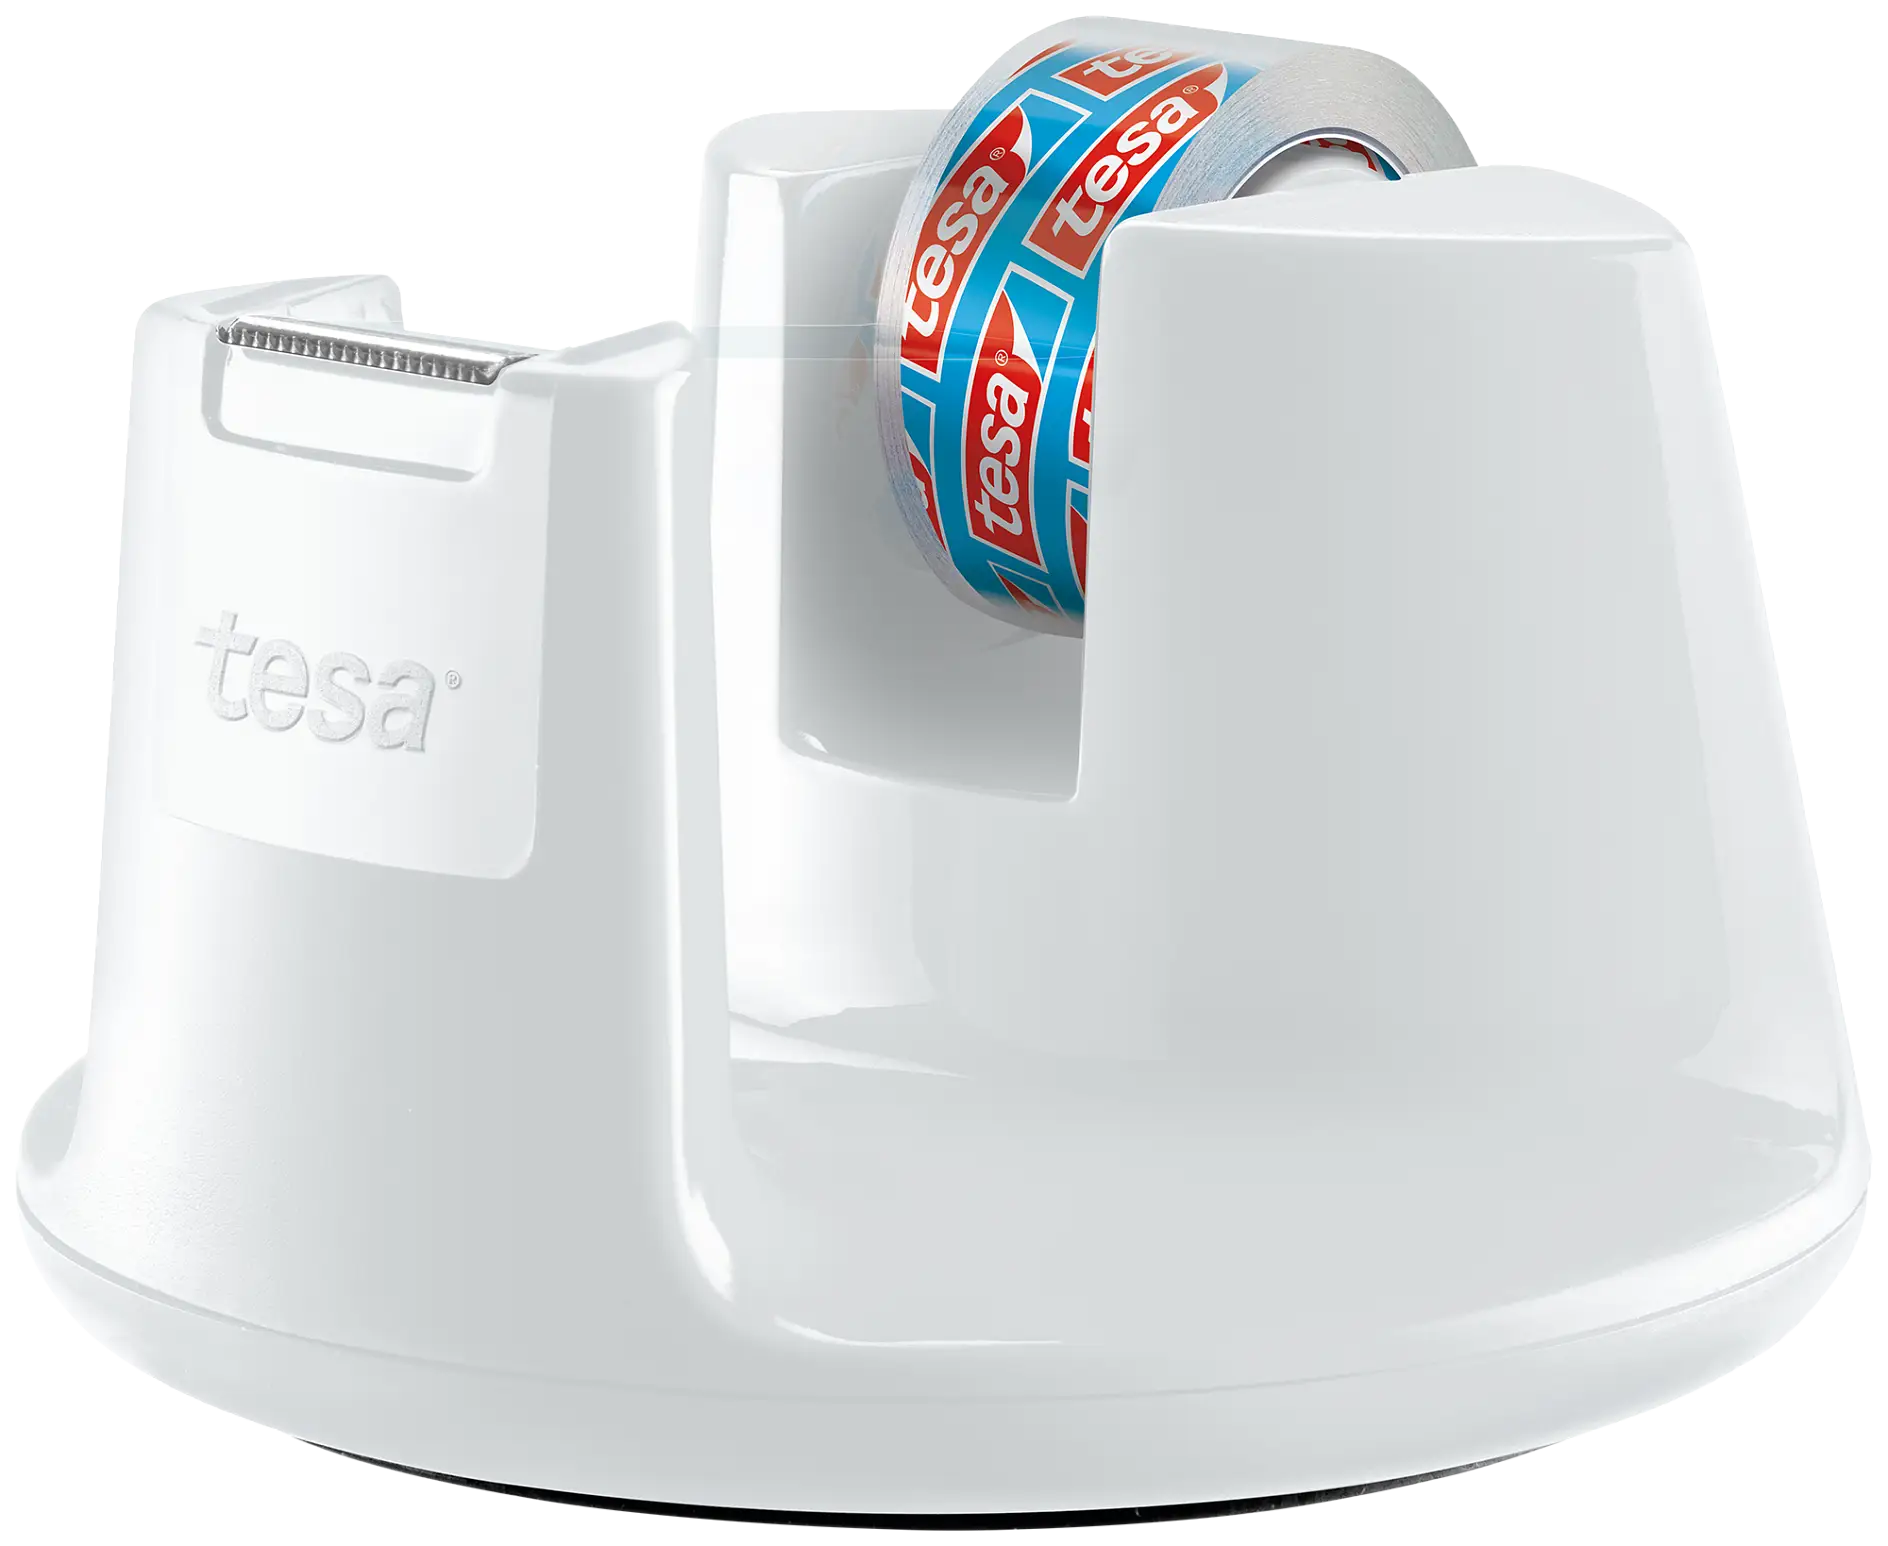 Thanks to the innovative tesa® Stop Pad, the dispenser stands firmly on the desk and can be operated with one hand and without slipping. For all rolls up to 33 m x 19 mm, 5.99 Euro.